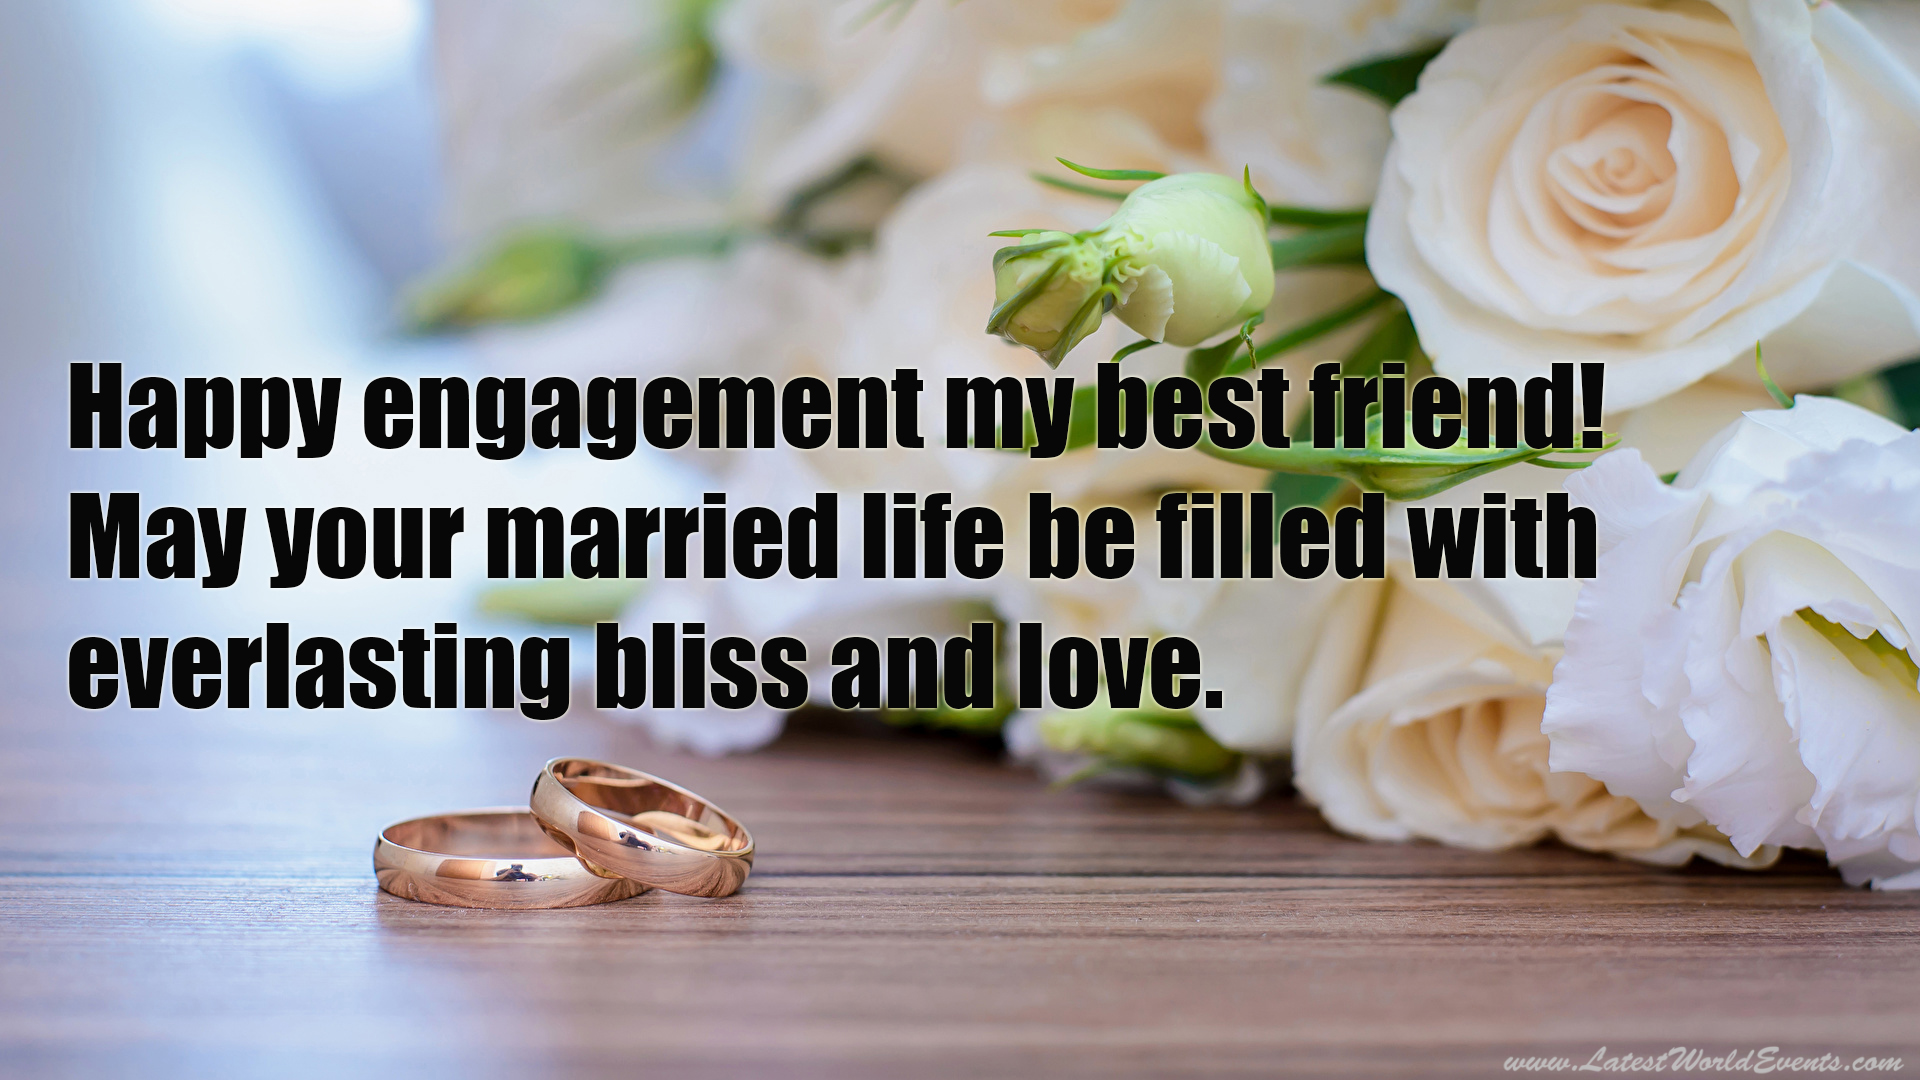 Happy Engagement Quotes For Best Friend : Both of my best friends are getti...